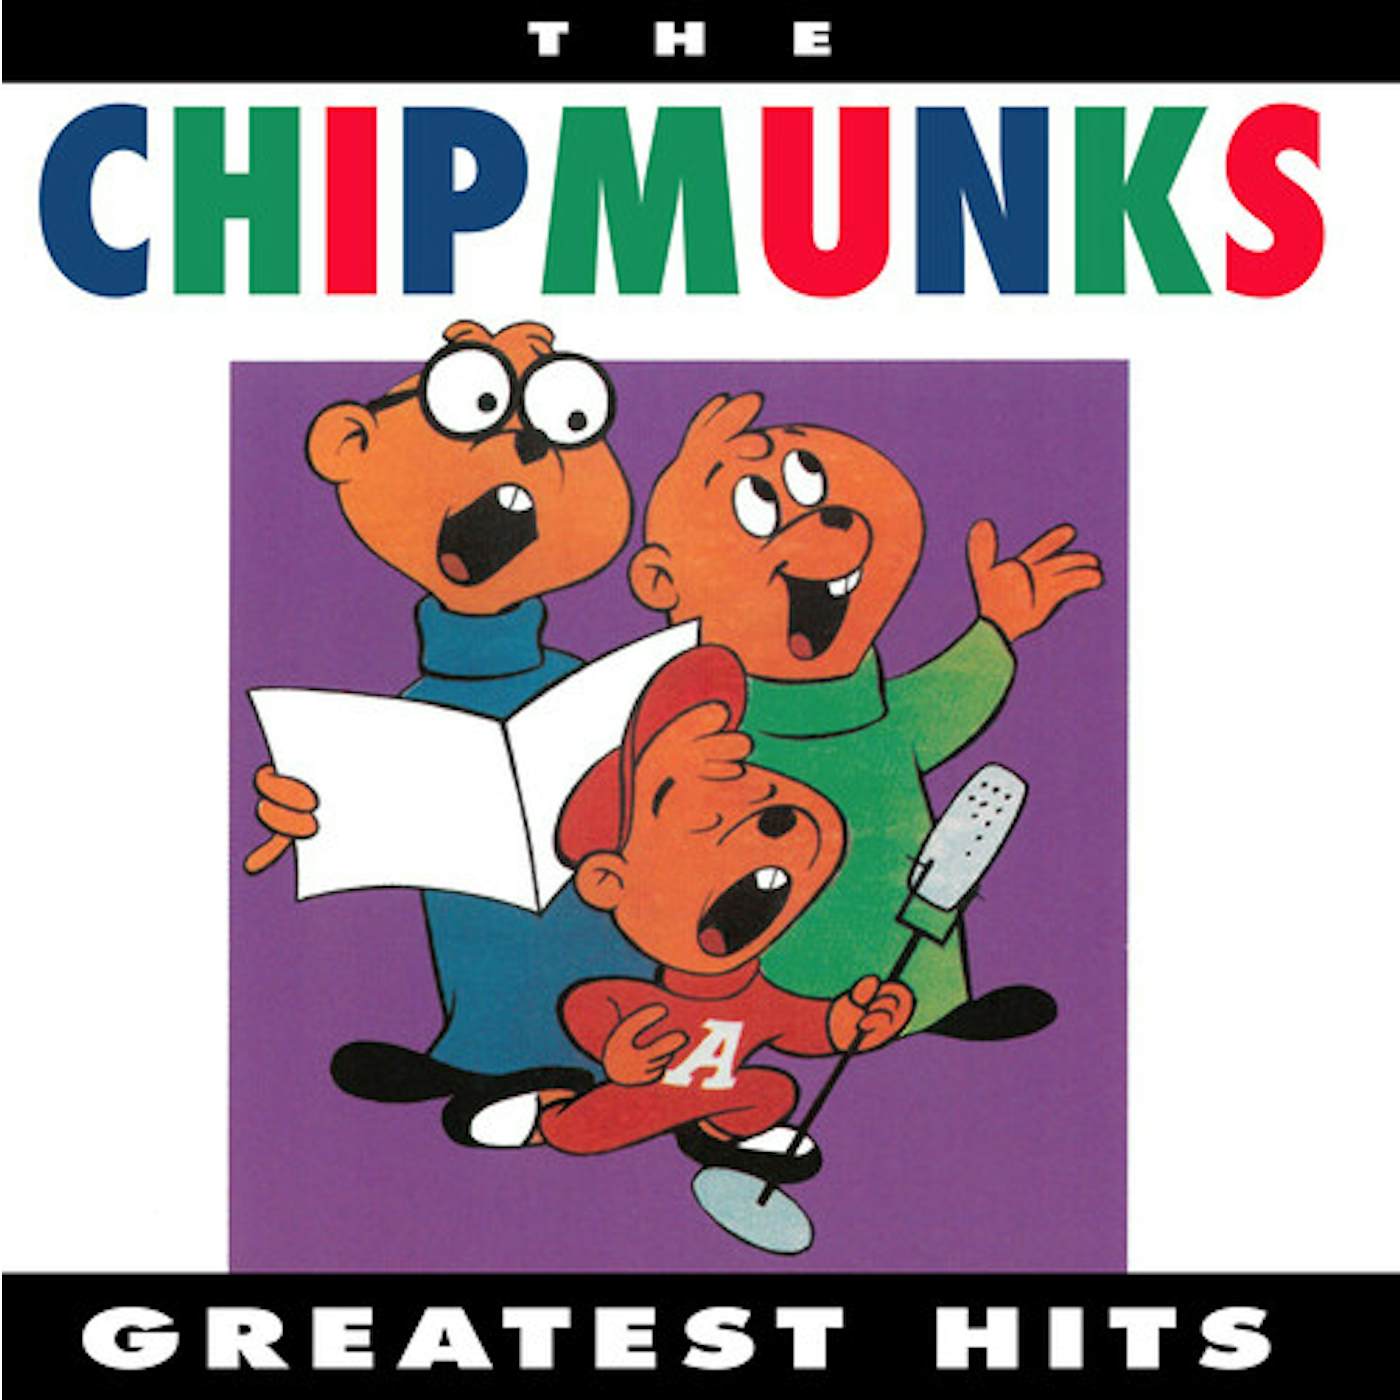 Alvin and the Chipmunks GREATEST HITS Vinyl Record